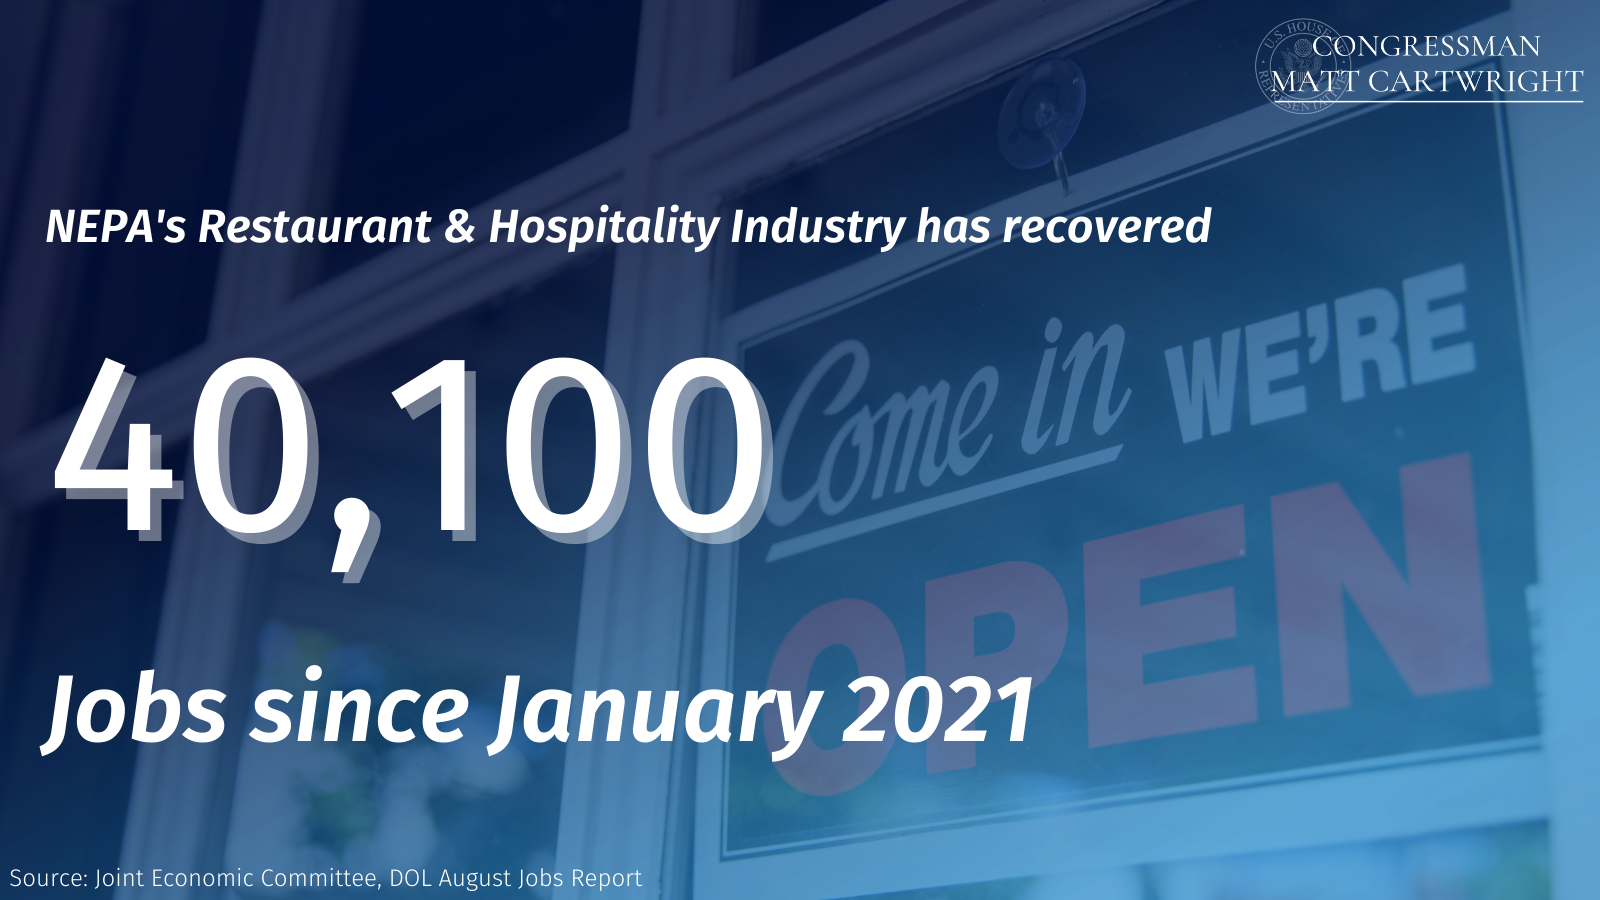 NEPA's restaurant and hospitality industry has recovered 40,100 jobs since January 2021